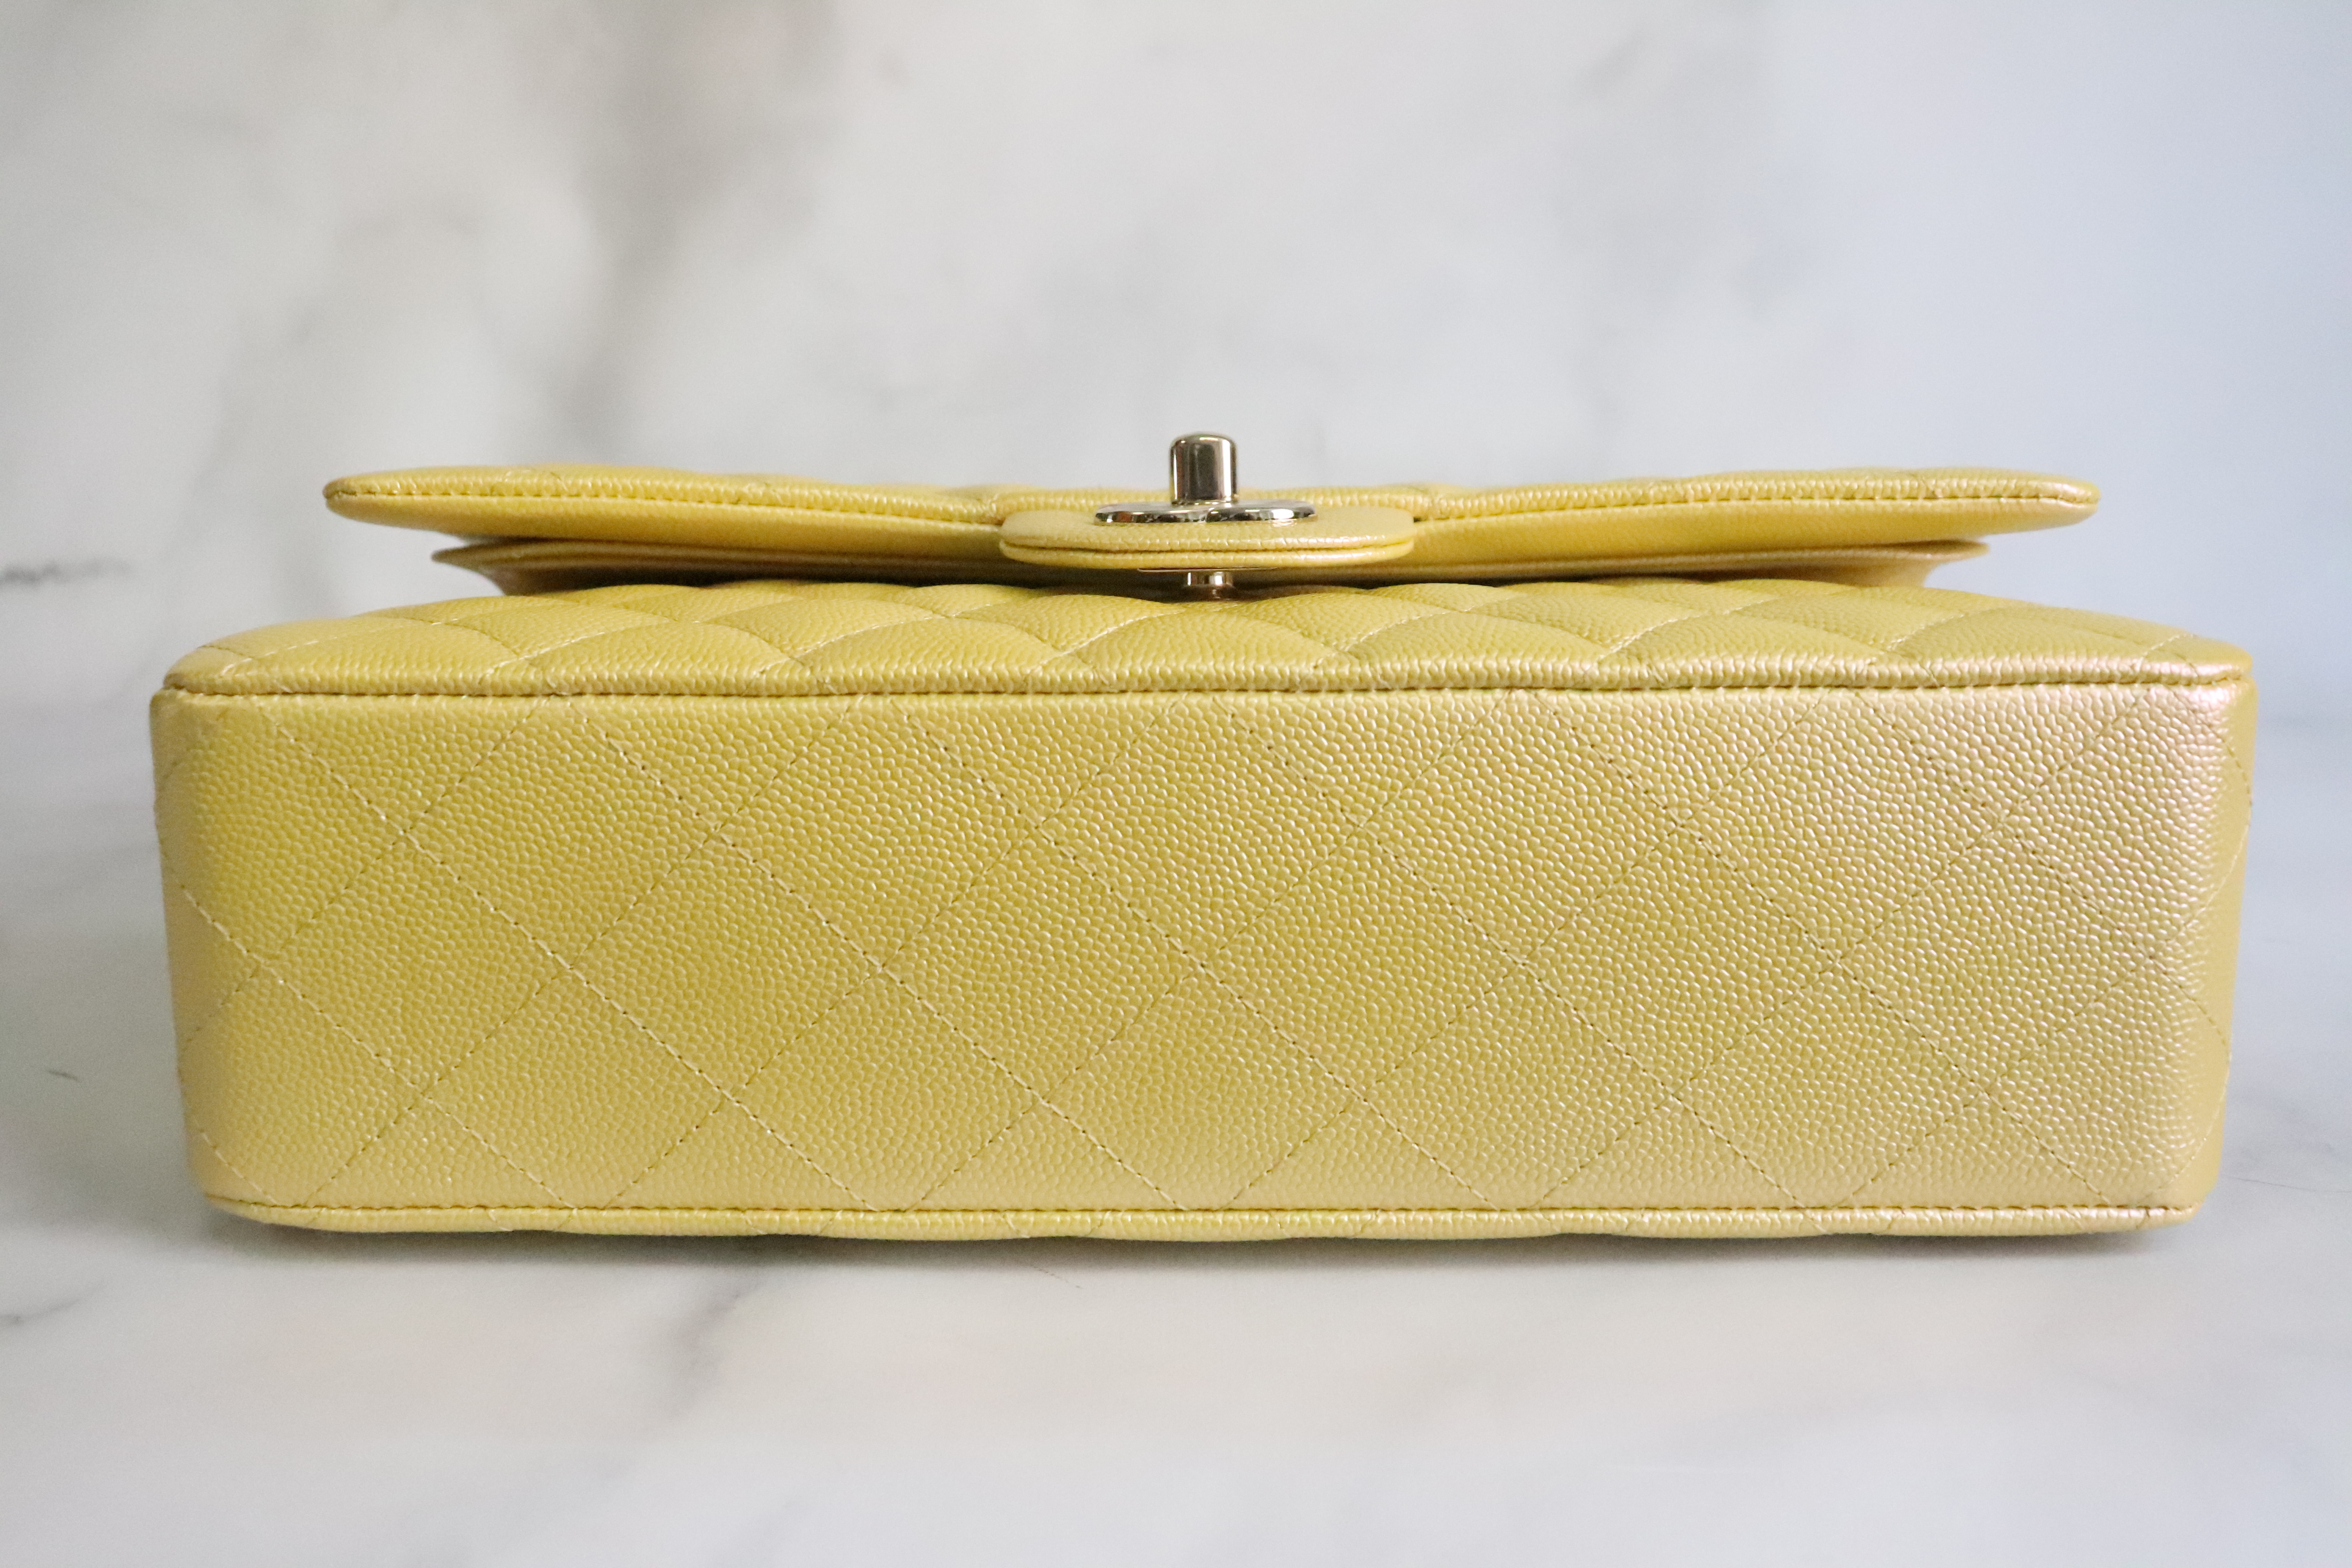 Pre-owned Yellow Caviar Leather Cc Zip Coin Purse